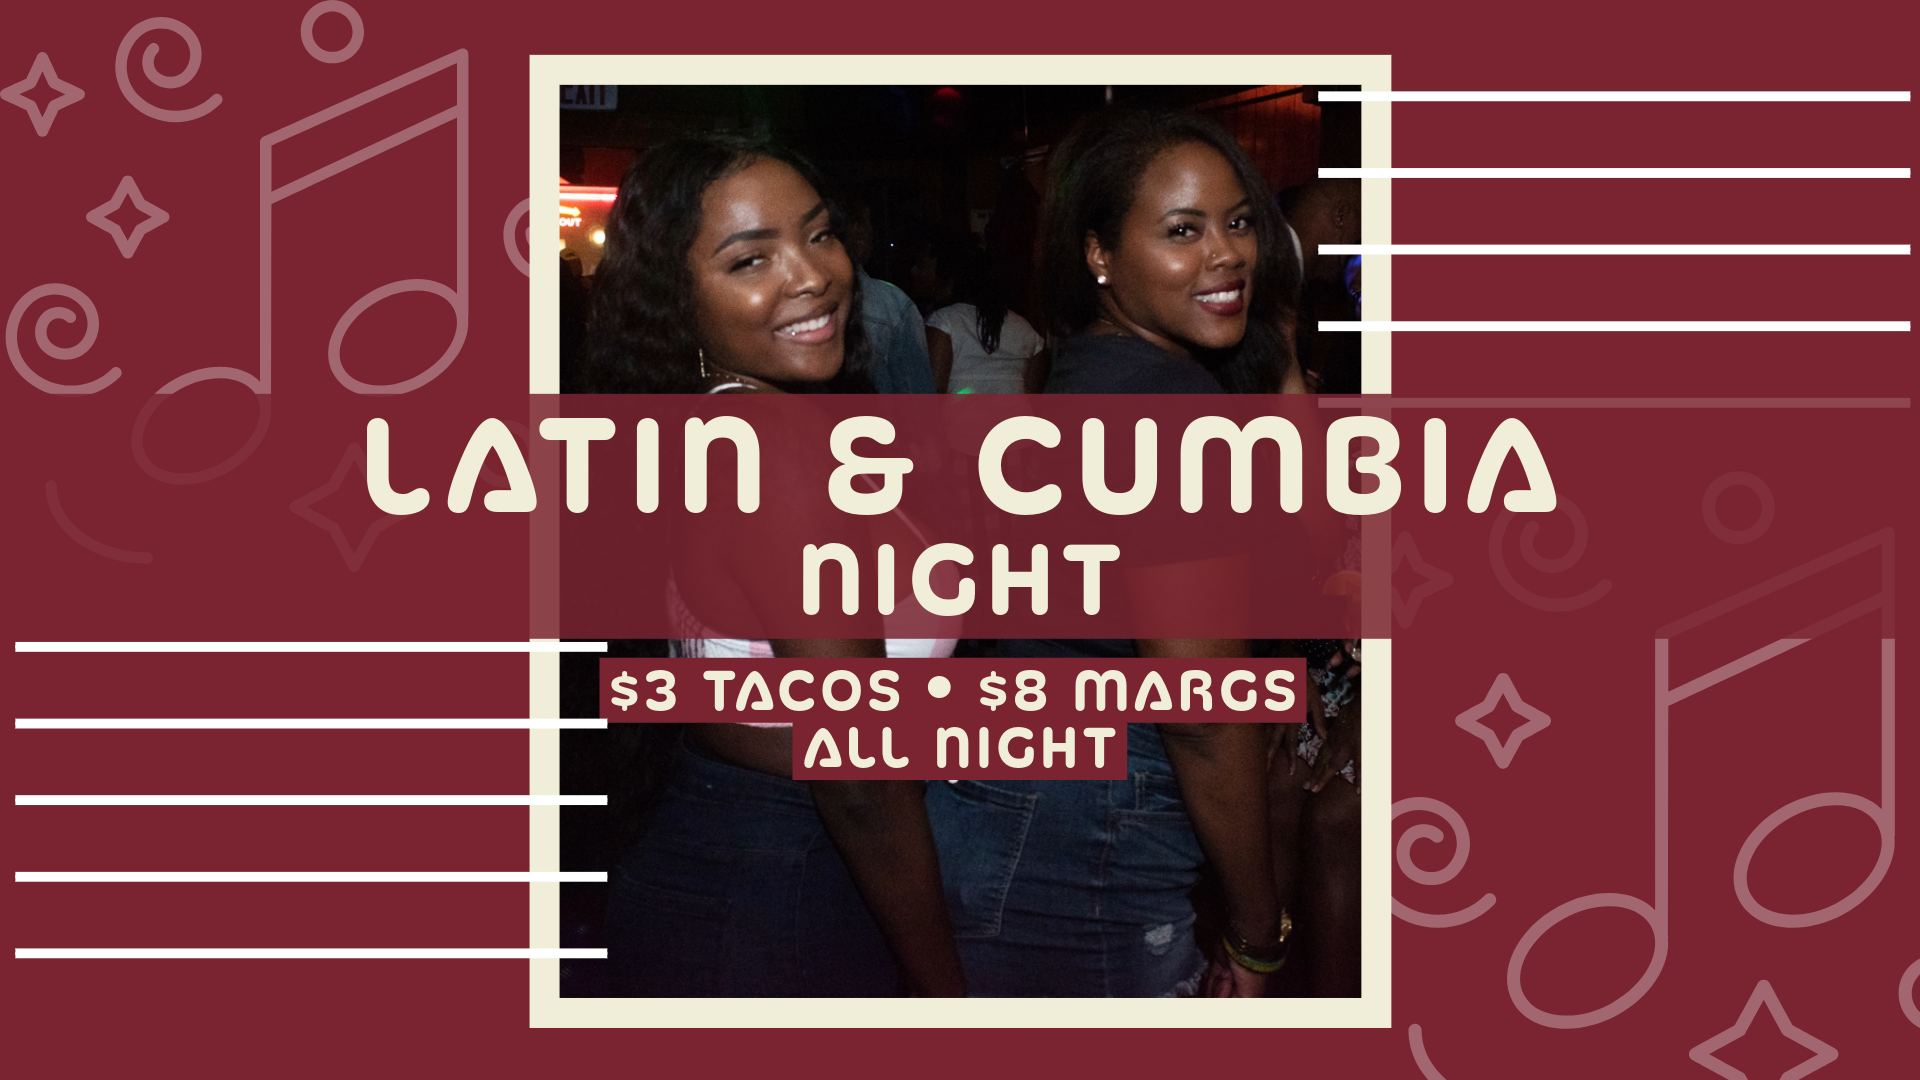 Promo image for Latin Night and Taco Tuesday party